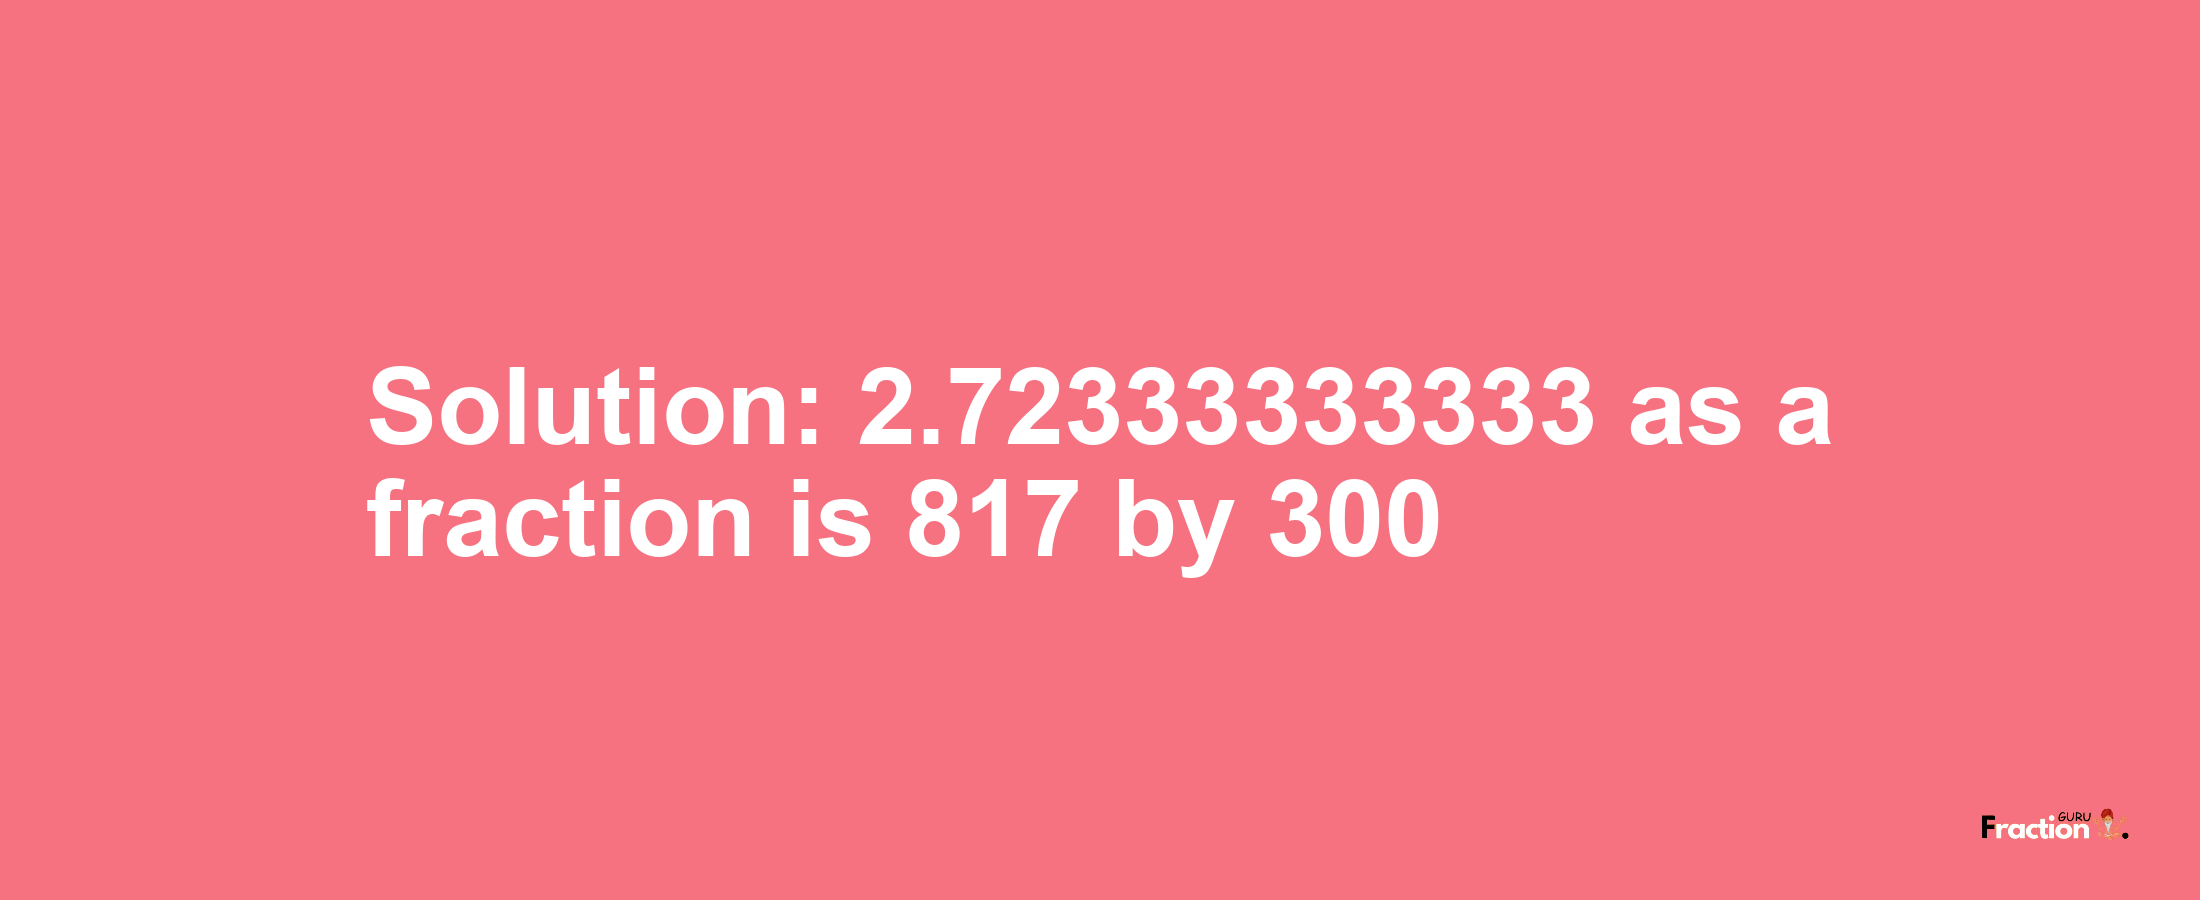 Solution:2.72333333333 as a fraction is 817/300